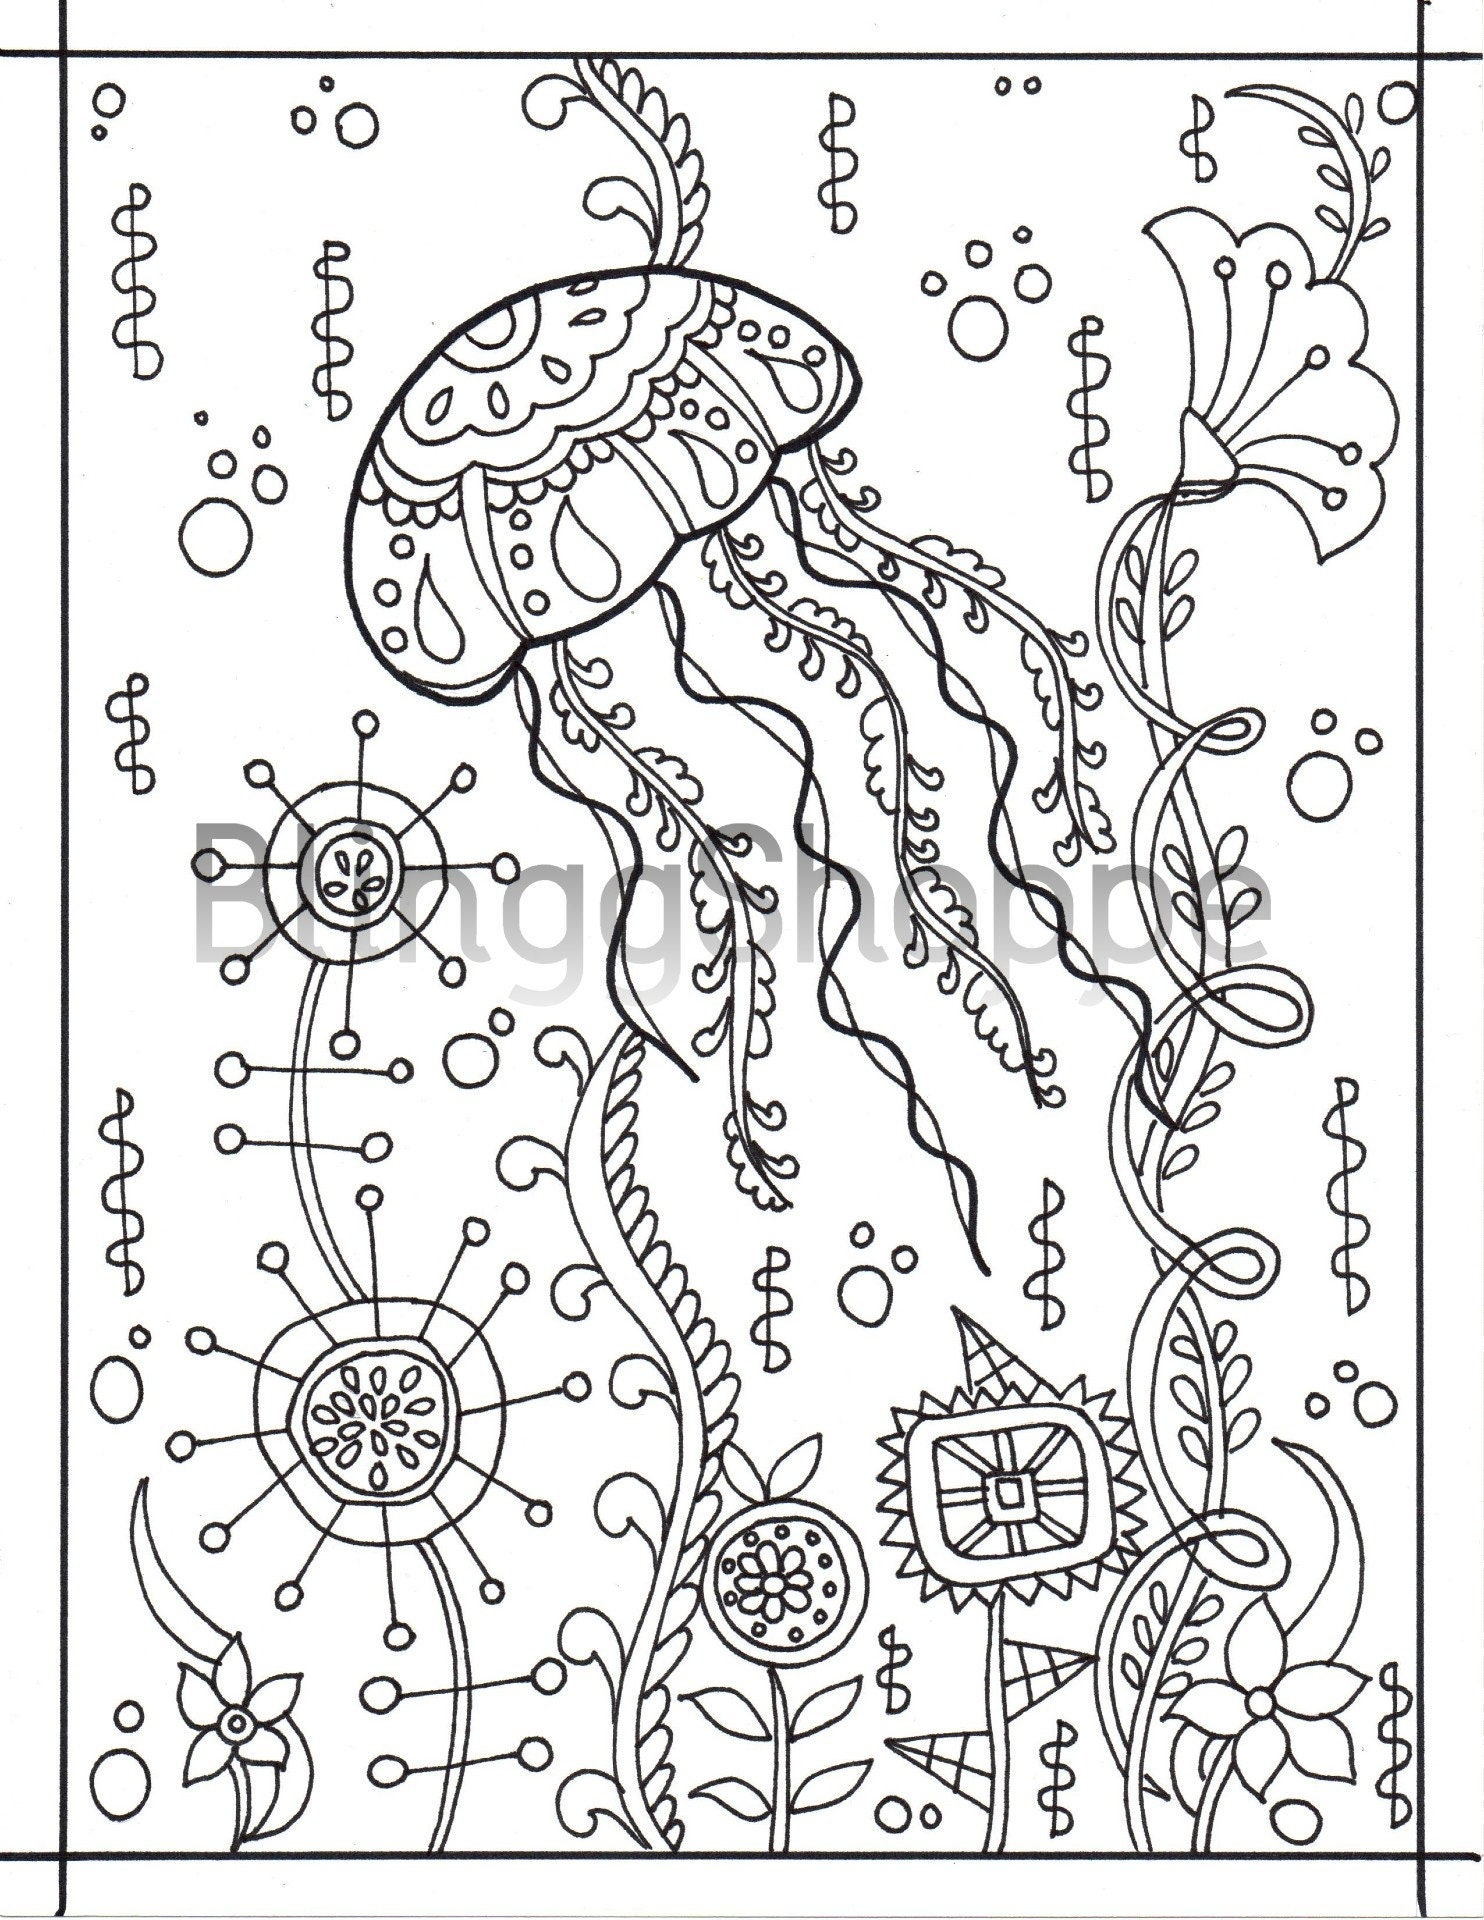 Adult Coloring Pages   Jellyfish Coloring Page   Sealife Coloring Page    Printable Coloring Page   Instant Download